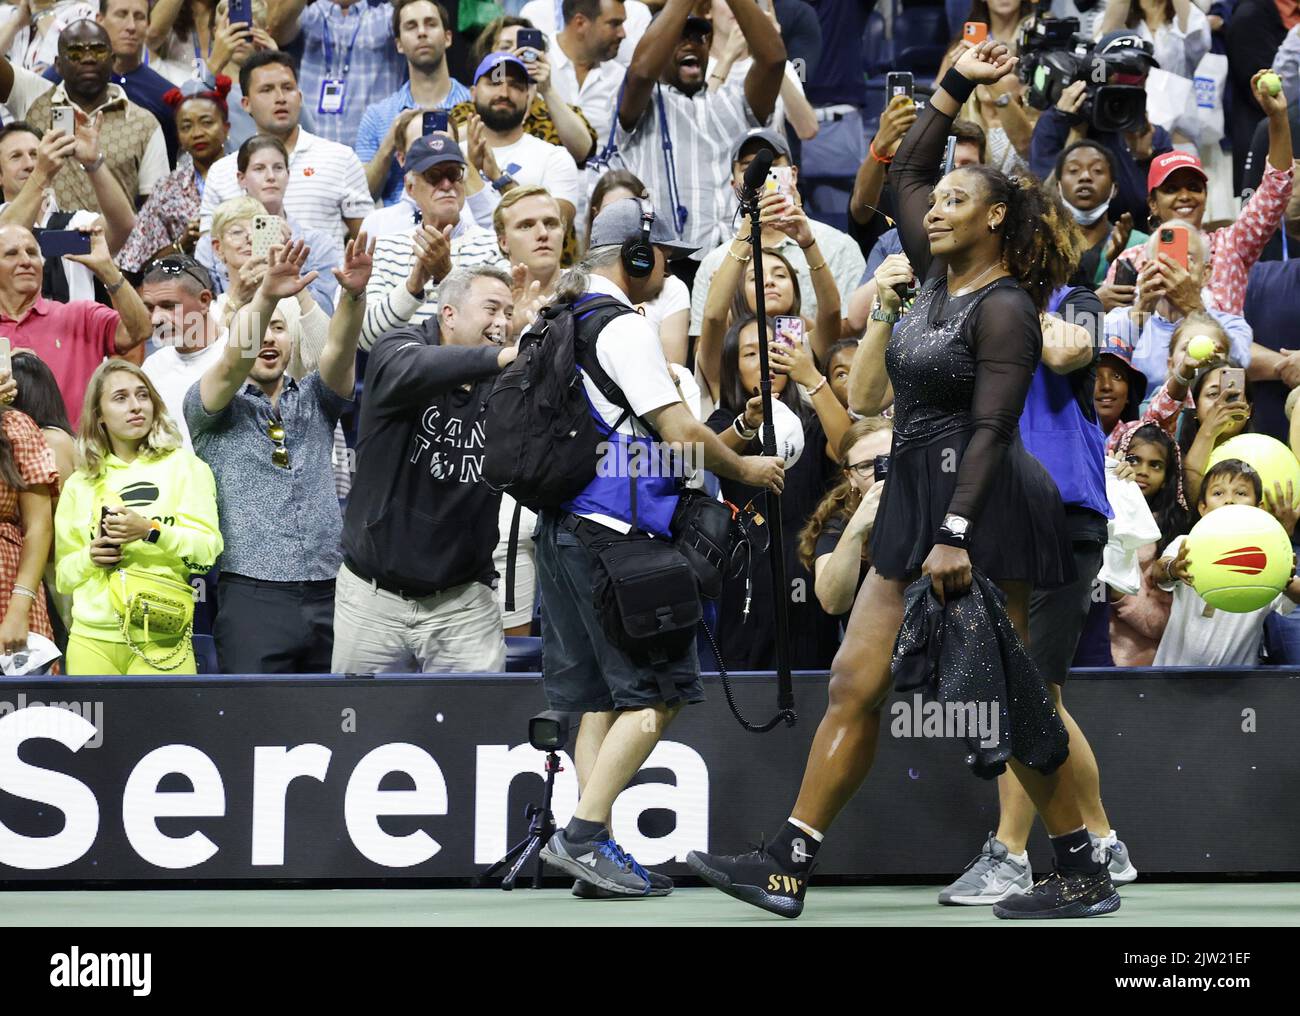 Flushing Meadow, USA. 02nd Sep, 2022. Serena Williams walks off of the court for possibly the last time ever after losing to Ajla Tomljanovic of Australia in 3-sets in the third round at the 2022 US Open Tennis Championships in Arthur Ashe Stadium at the USTA Billie Jean King National Tennis Center in New York City, on Friday, September 2, 2022. Serena announced last month she will be stepping away from tennis to focus on growing her family and other pursuits. Photo by John Angelillo/UPI Credit: UPI/Alamy Live News Stock Photo